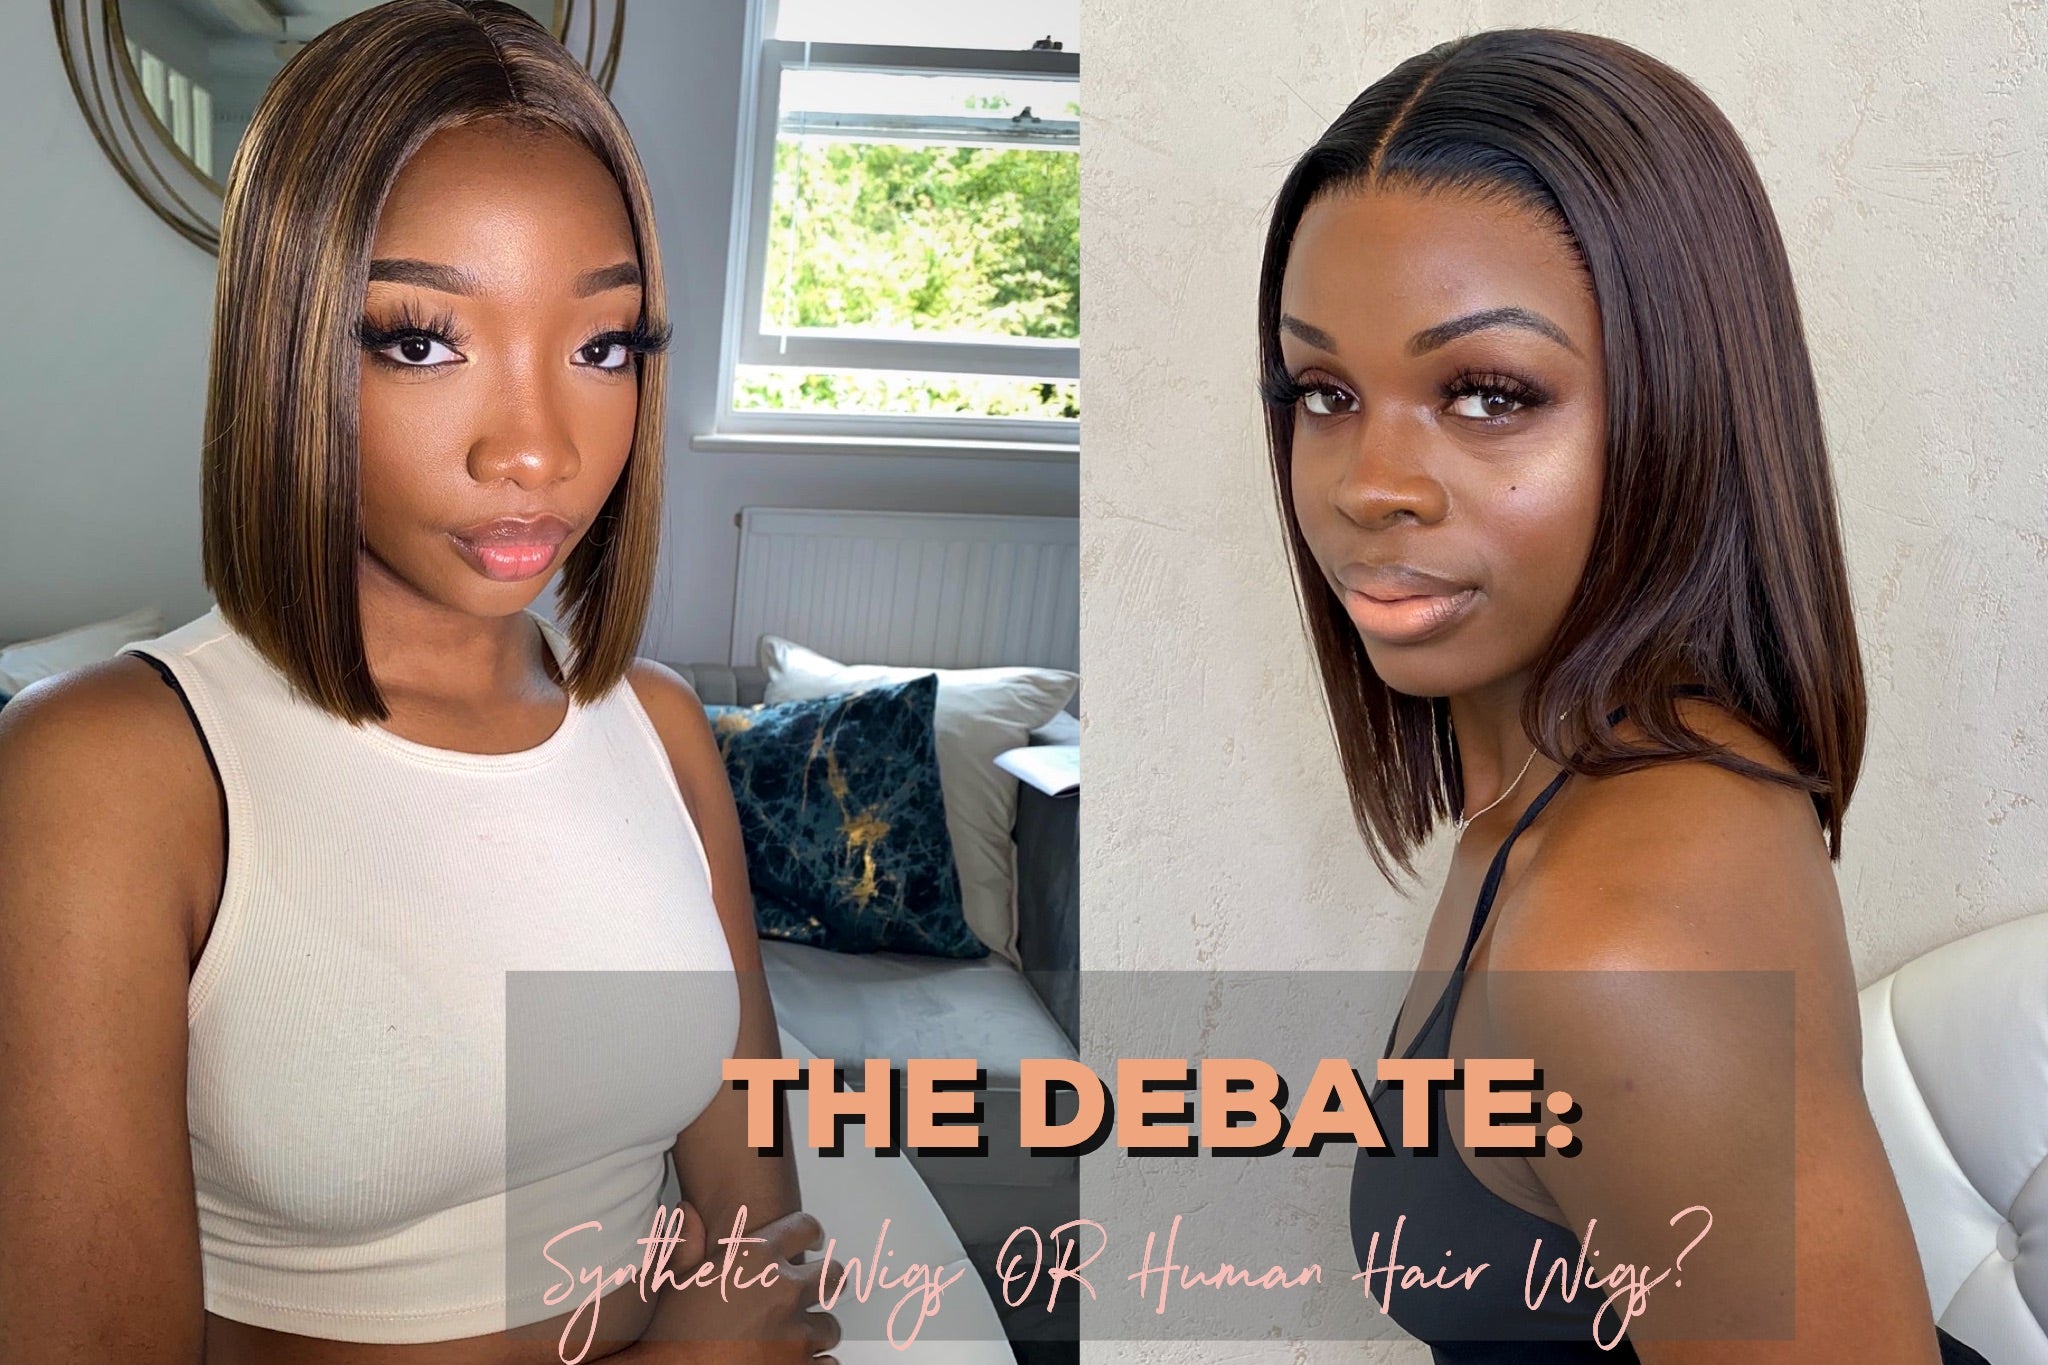 Synthetic Wigs or Human Hair Wigs?